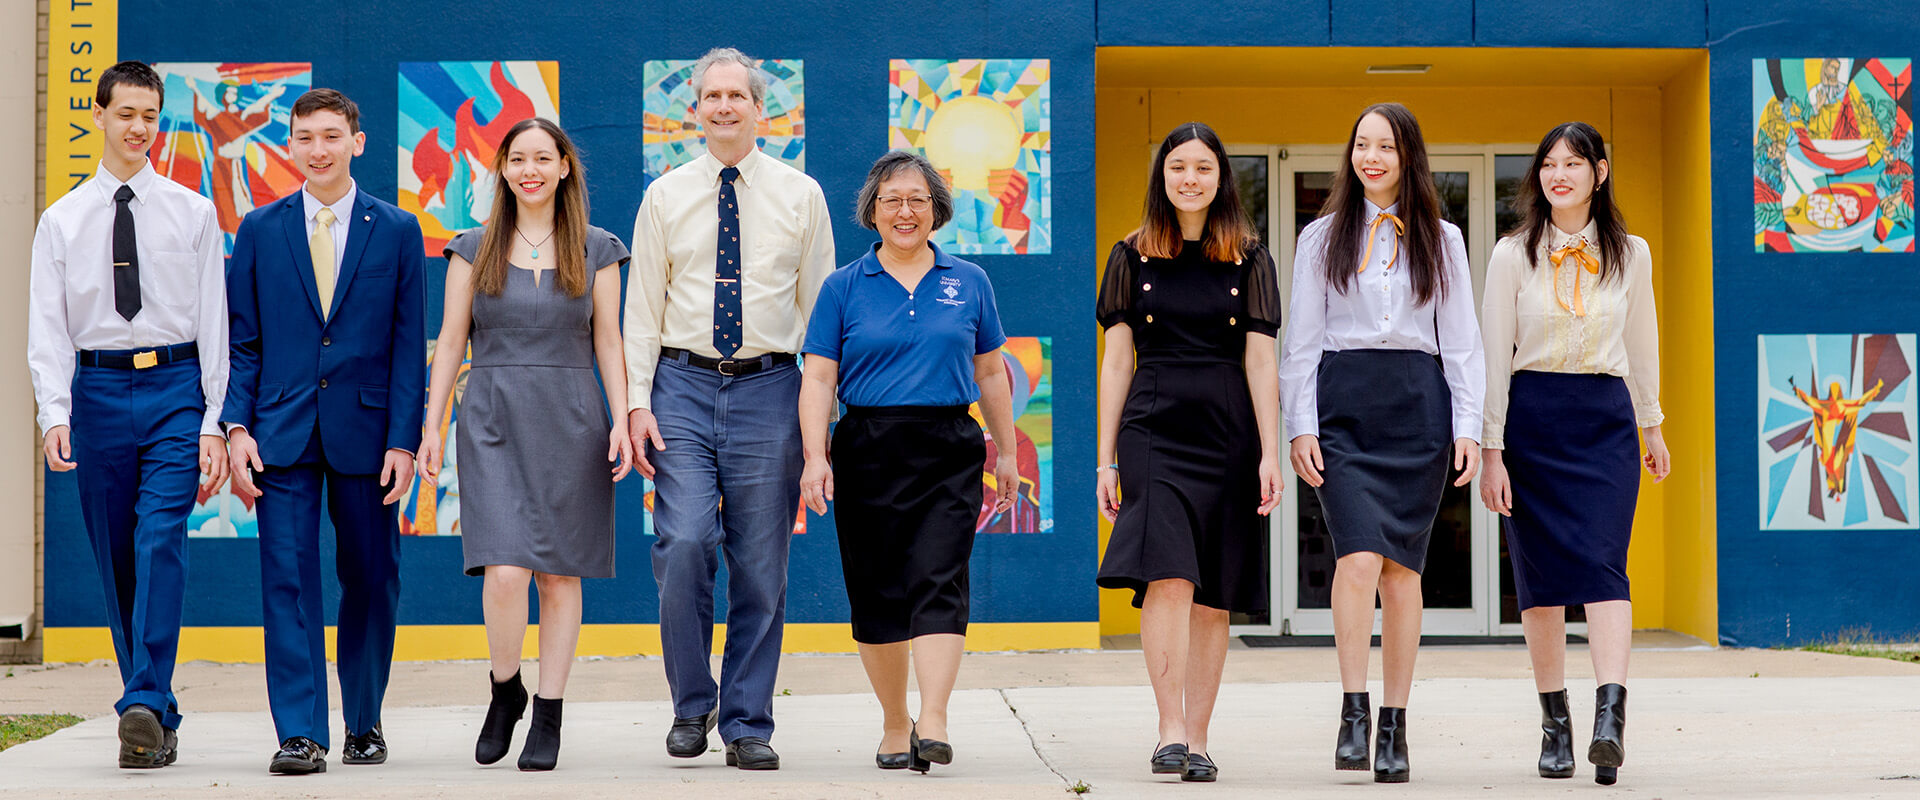 Linda Muller (center, blue shirt) and her family walk by the Catholic Artway